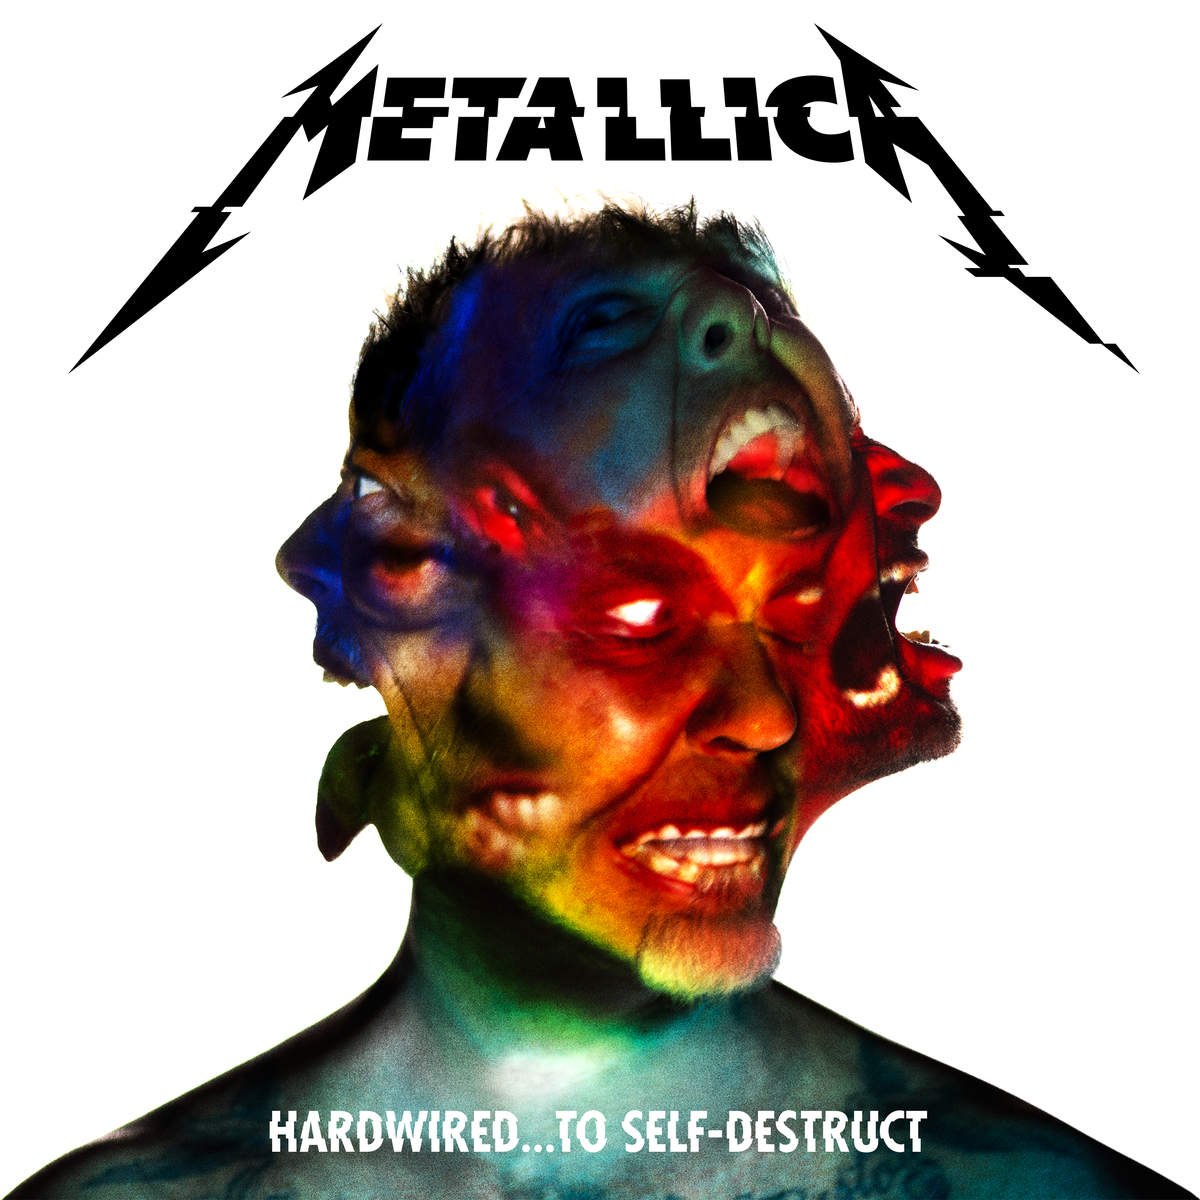 Metallica-Hardwired To Self-Destruct-Deluxe Edition-3CD-FLAC-2016-RiBS Download